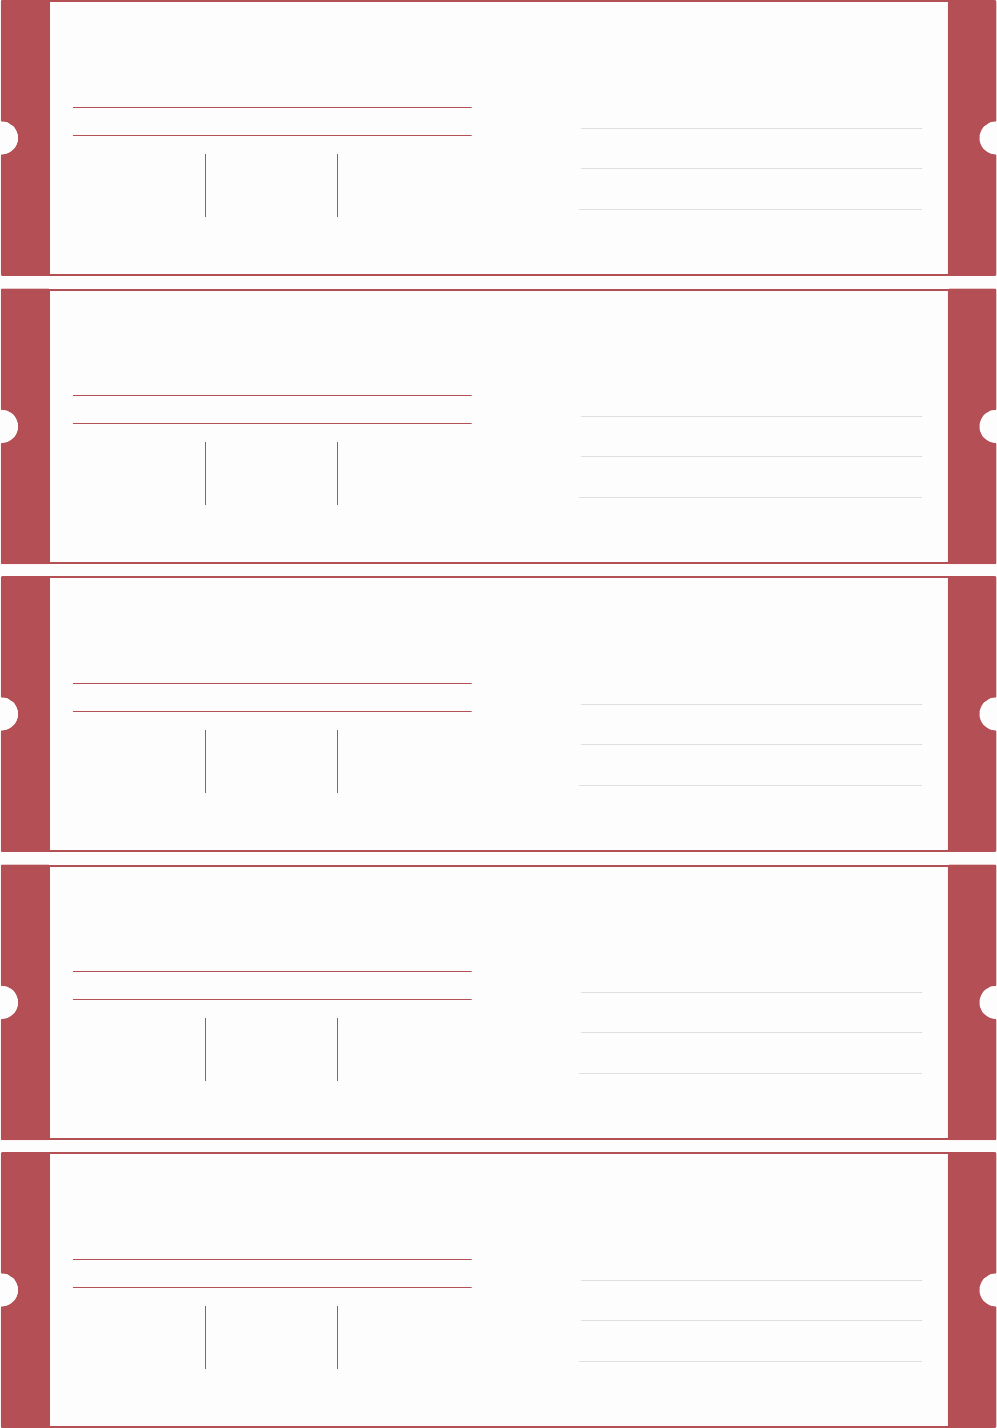 Raffle Ticket Template Word Lovely Download Download Raffle Ticket Template Word format for